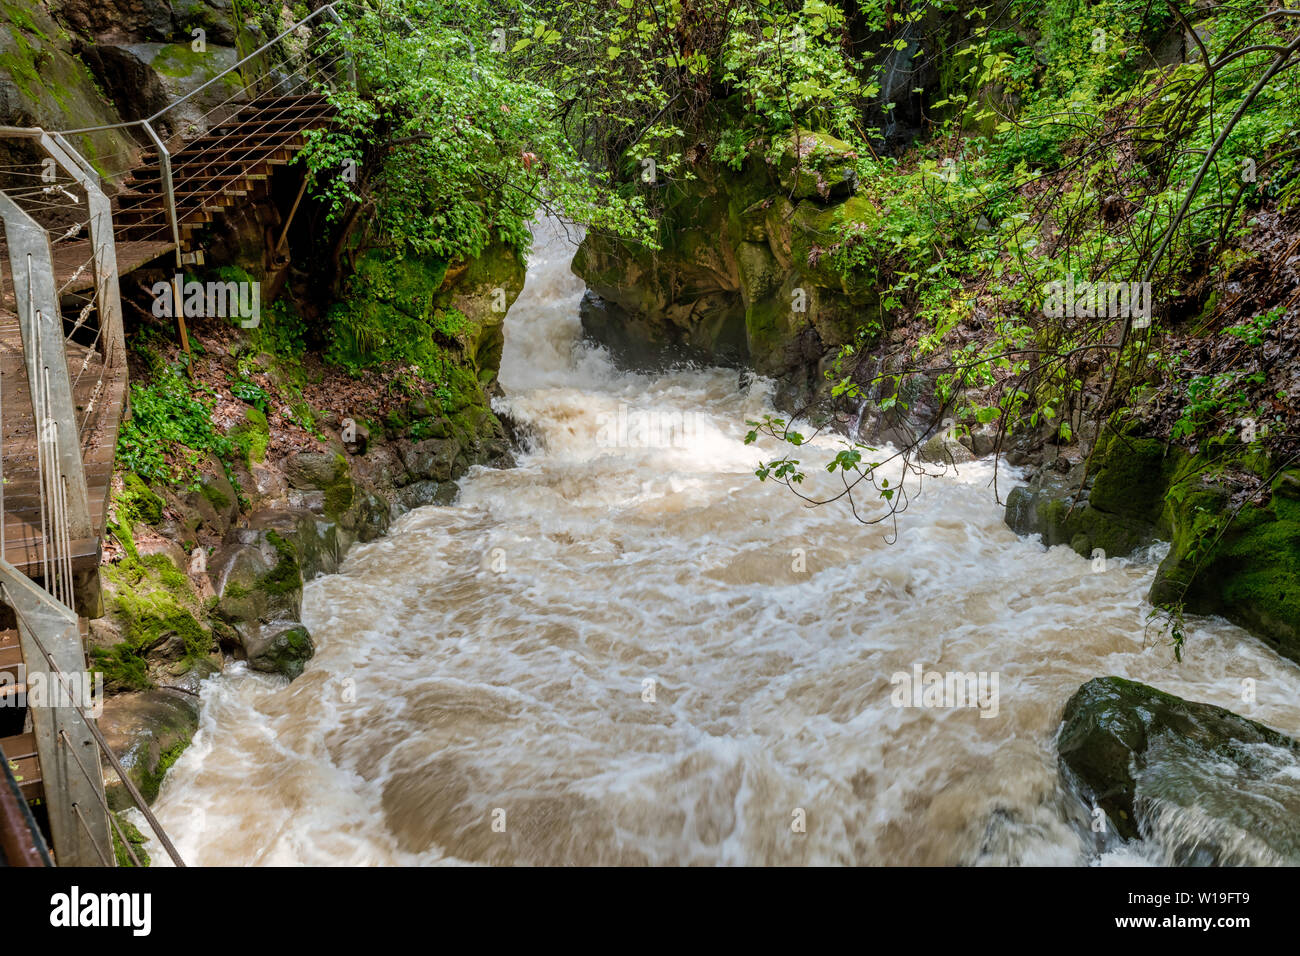 Banias river at north of Israel, flowing over rocks Stock Photo